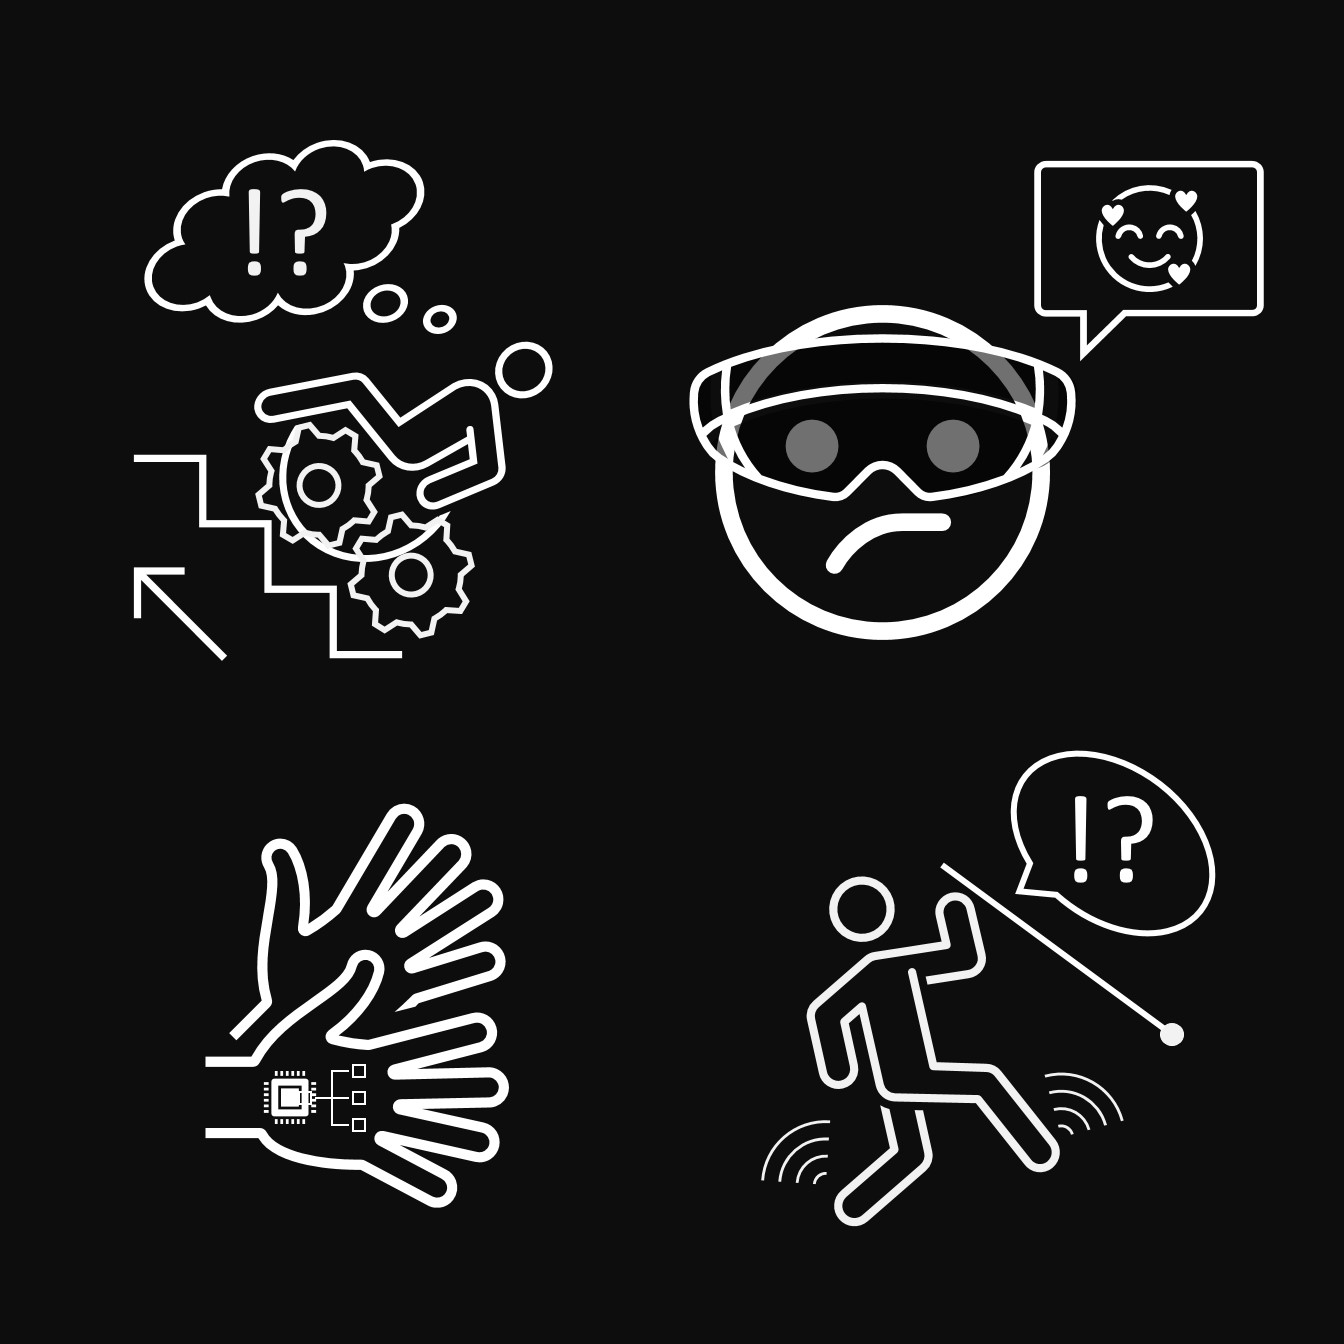 graphic representation of various disability dongles. Top Left stair climbing wheelchair. Top right "social emotion recognition" AR goggles. Bottom Left Sign language gloves. Bottom Right haptic shoes interfering with blind person's navigation.